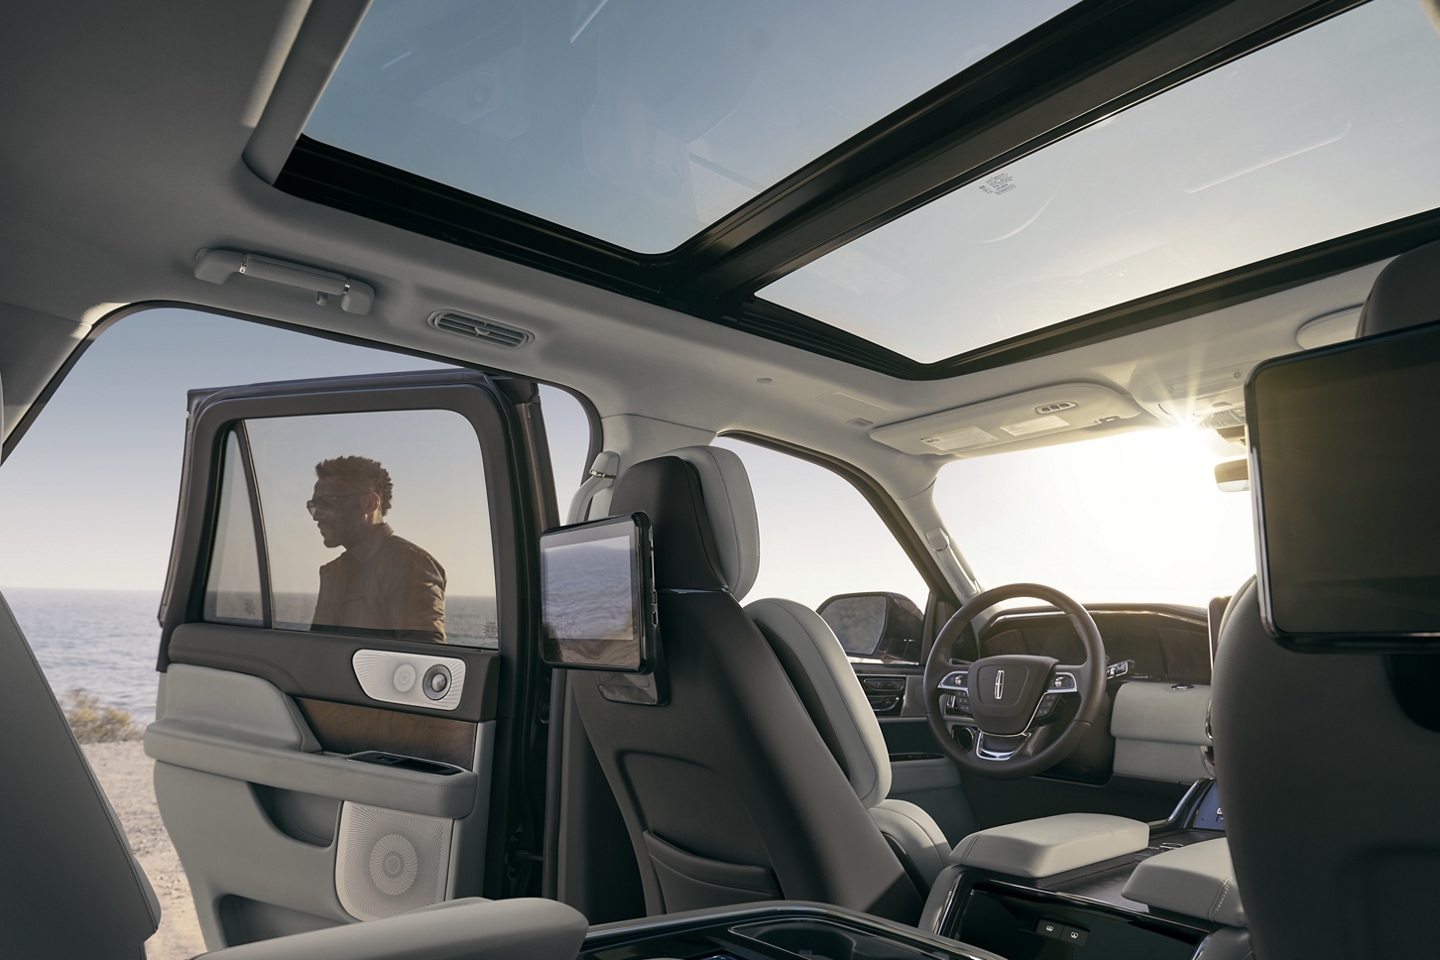 Blue skies are seen through the expansive panoramic Vista Roof® as sunlight illuminates the broad cabin with a warm glow.